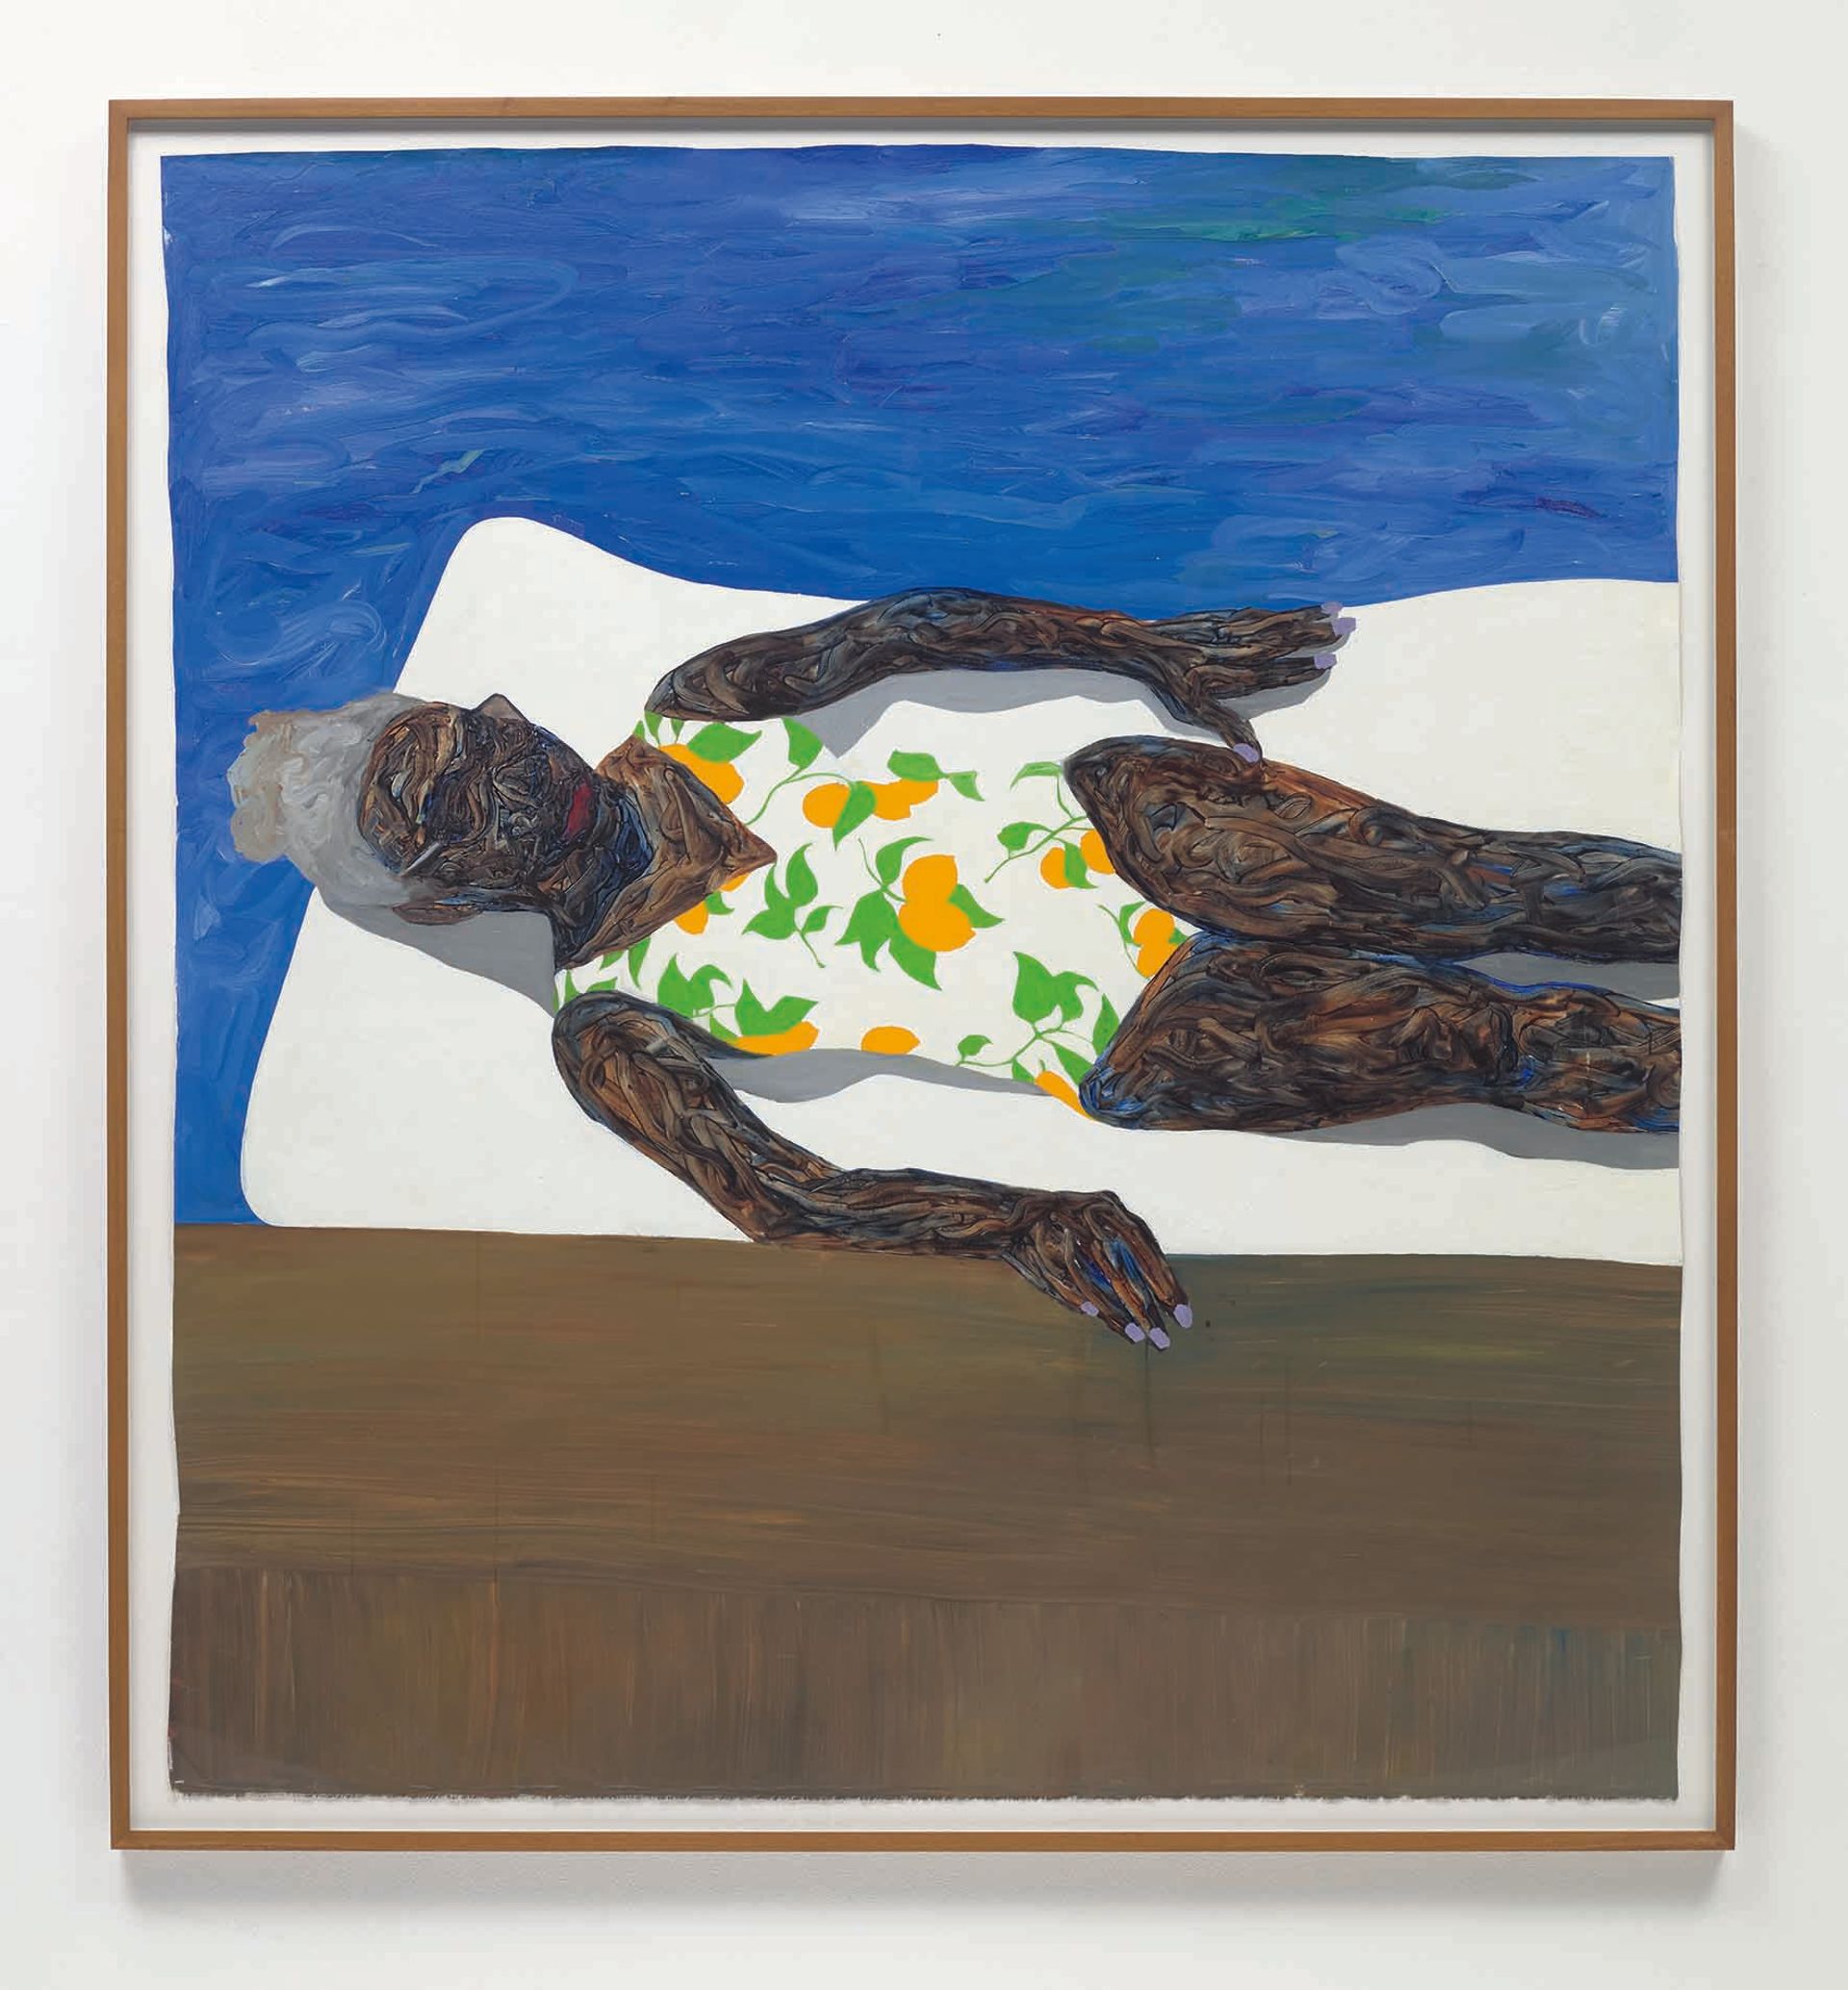 The Lemon Bathing Suit (2019) by the rising Ghanaian artist Amoako Boafo sold at Phillips earlier this year for £675,000, more than ten times its estimate Courtesy of Phillips.